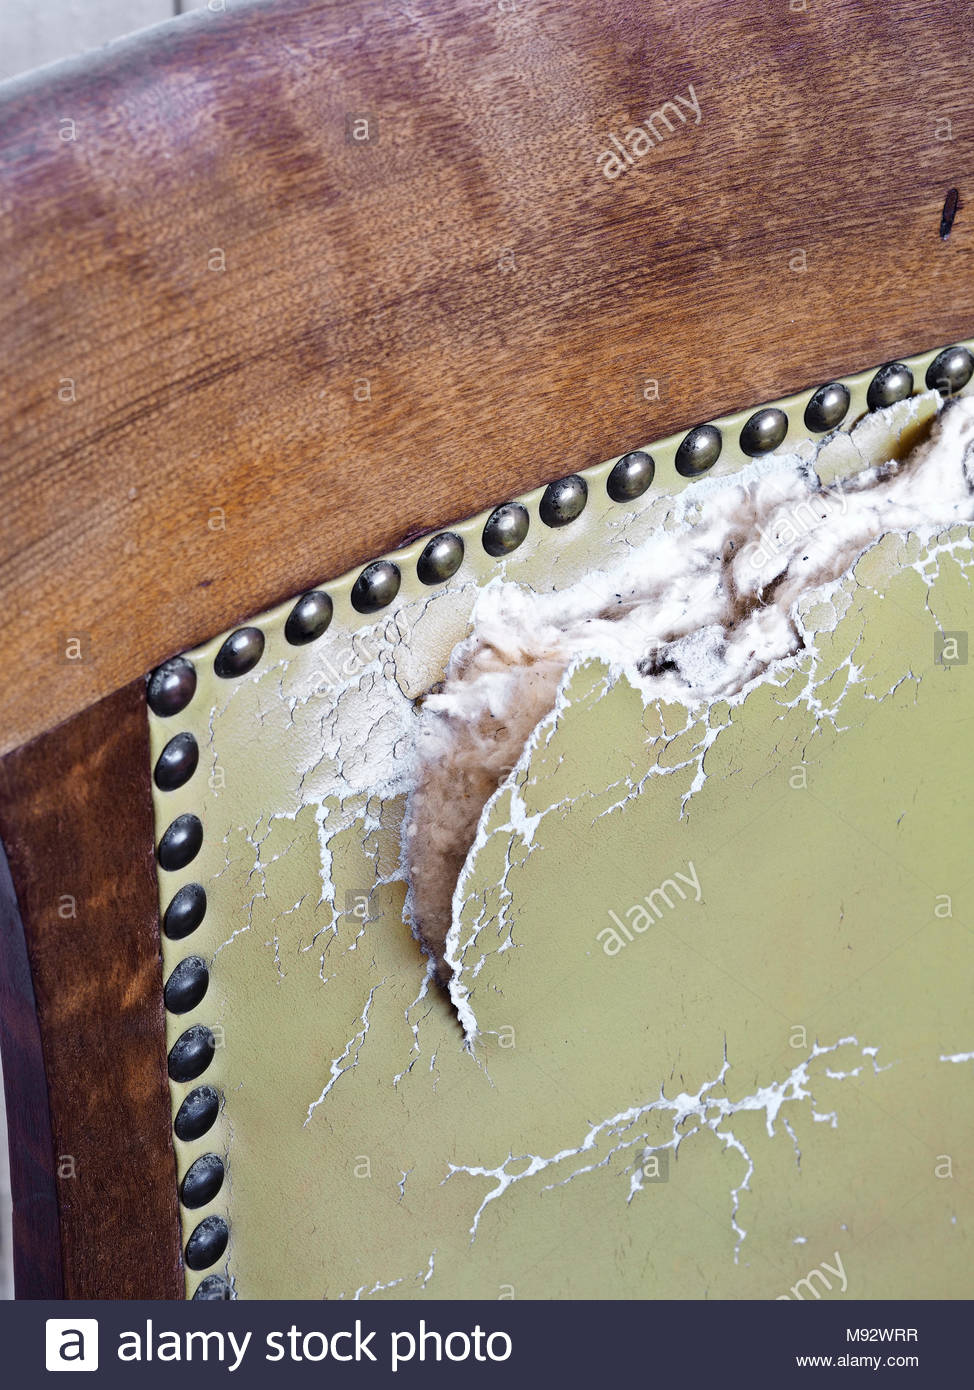 Wooden Chair With Worn Stuffing With Copy Space Stock Photo